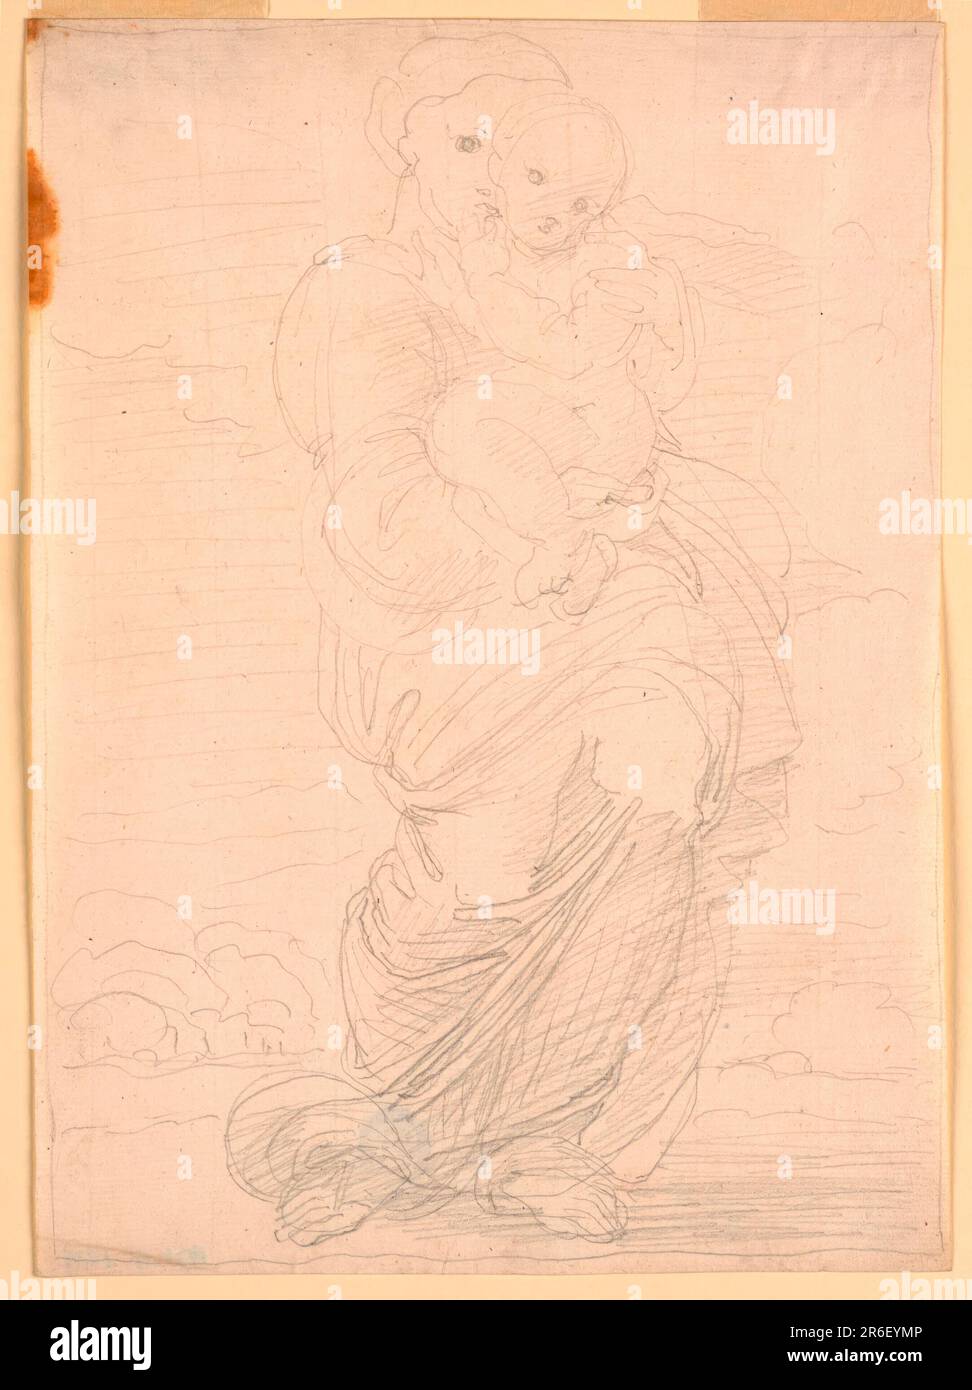 The Virgin walks through the country, supporting the Child. Framing line. Date: 1820-1850. Graphite, impressed lines on paper. Museum: Cooper Hewitt, Smithsonian Design Museum. Stock Photo